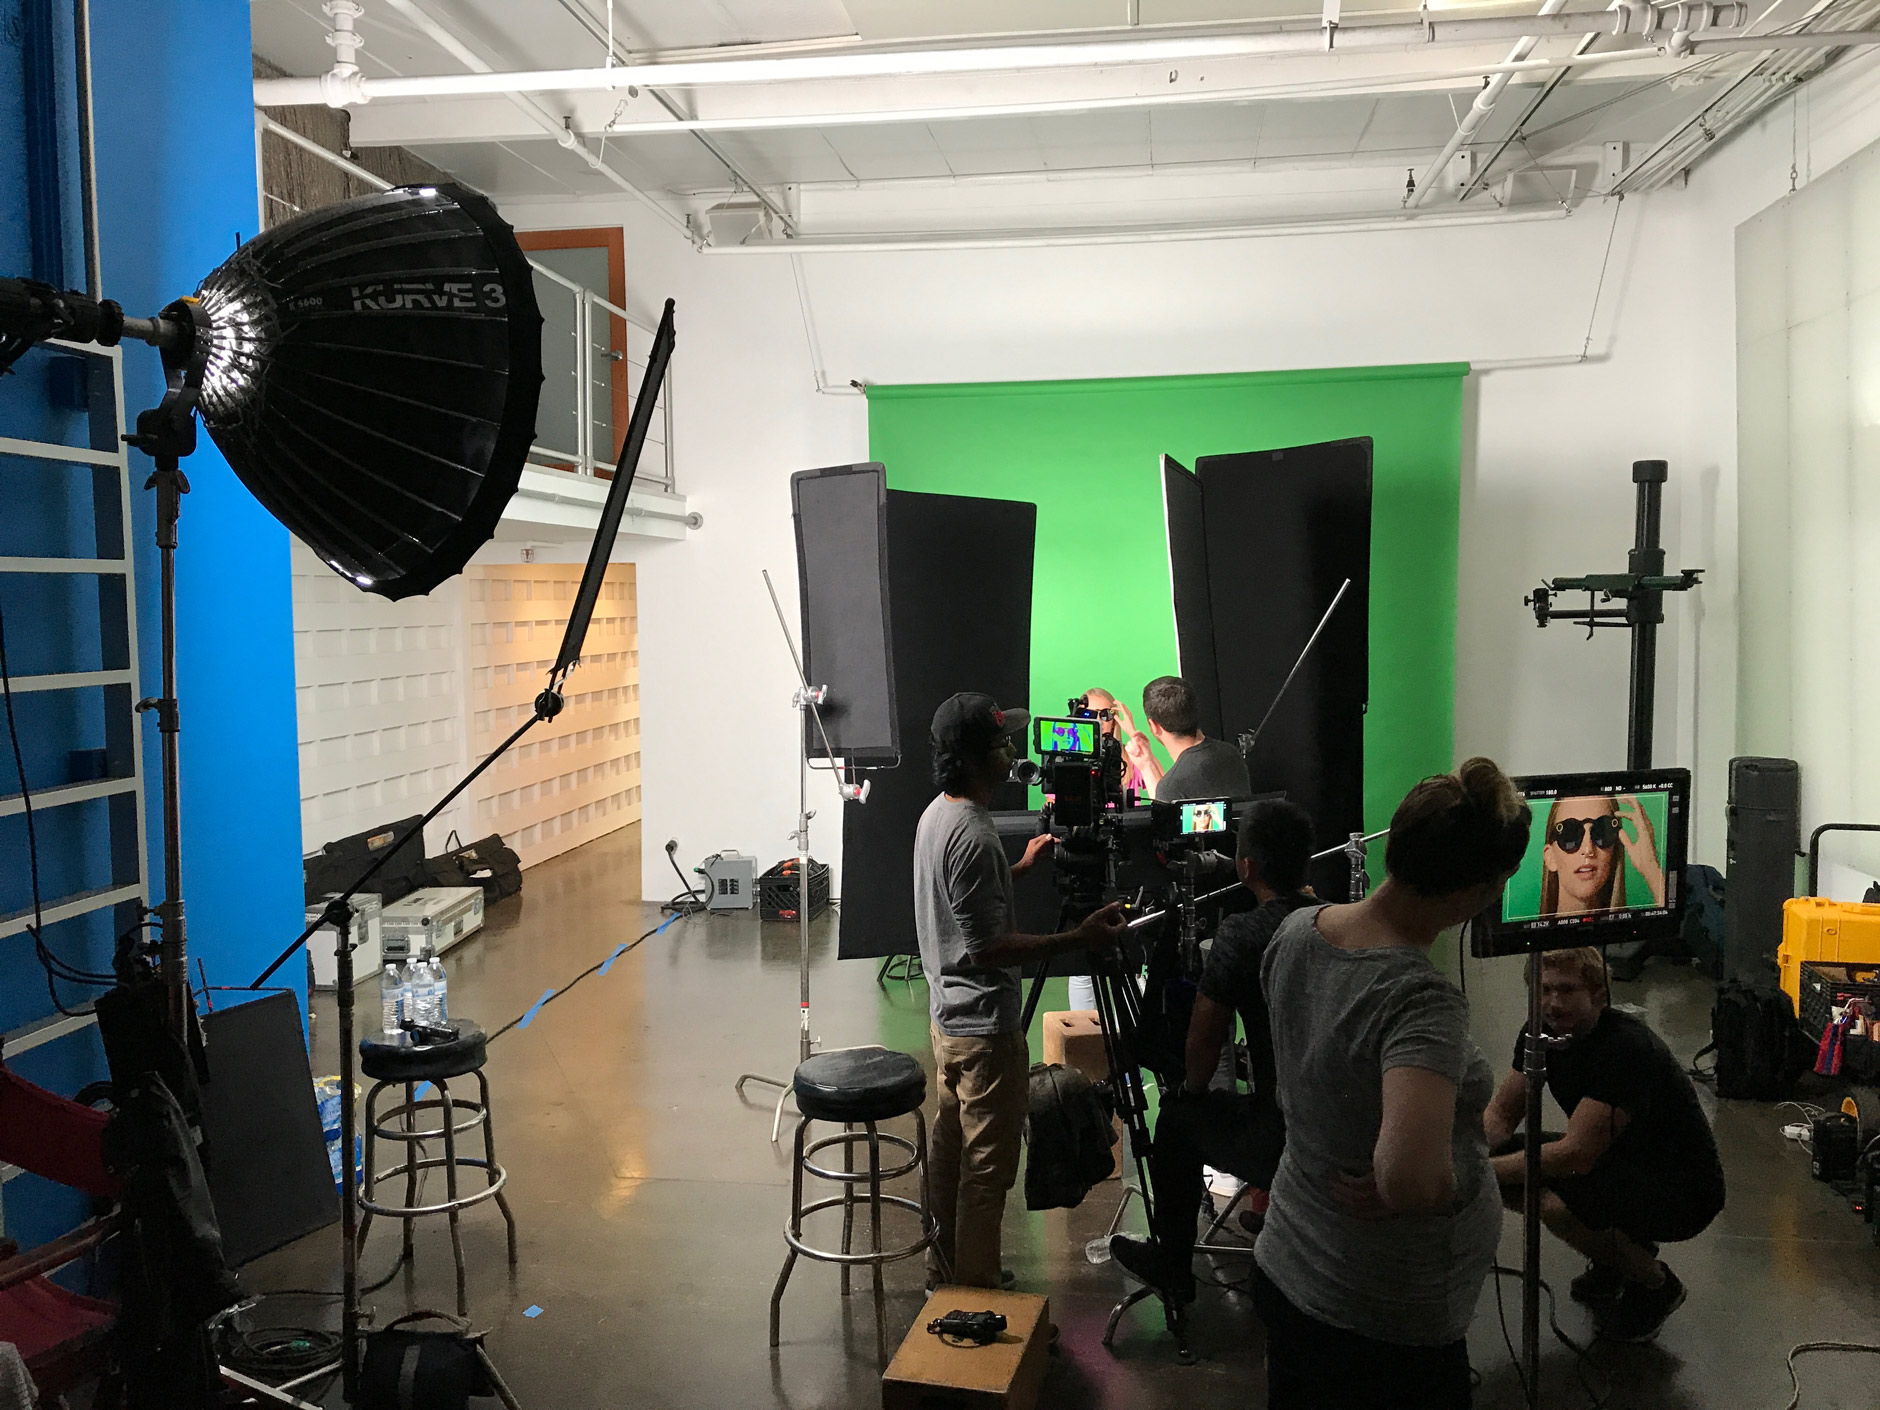 Video Rental Studio in LA with Green Screen available